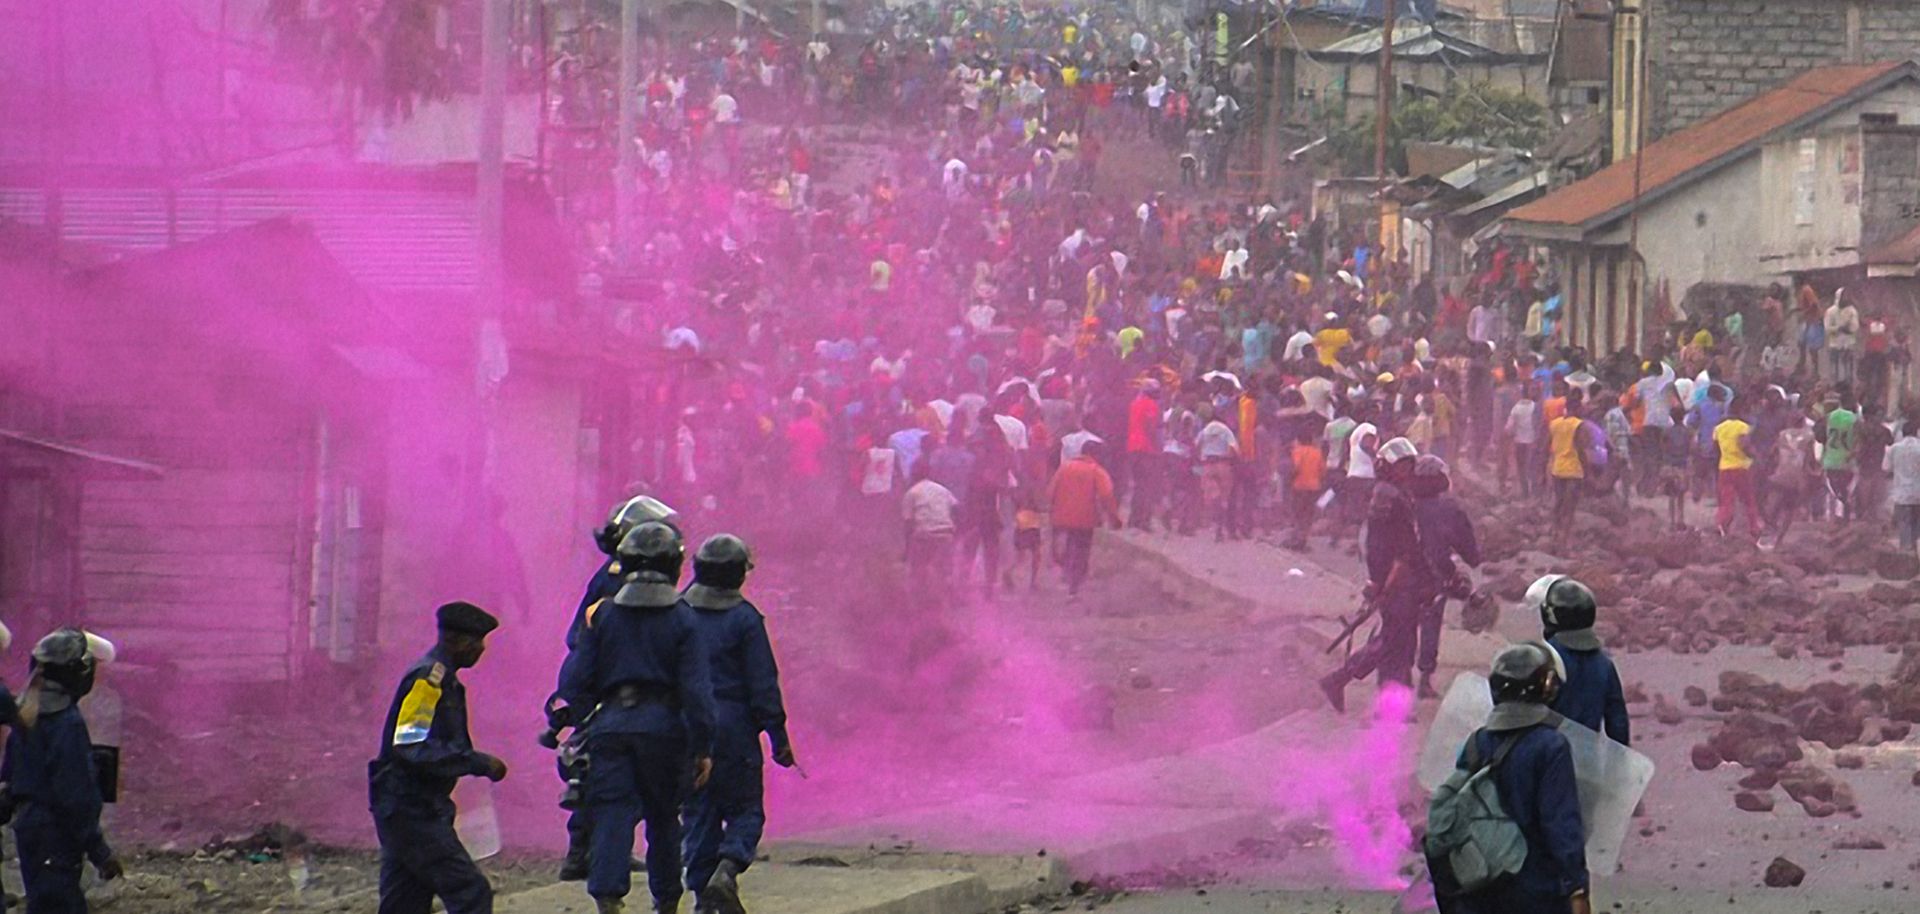 Congolese police launch flares during a demonstration in Goma on Sept. 19. The postponement of the country's presidential election has sparked protests and prompted harsh security crackdowns in many cities, including Kinshasa.